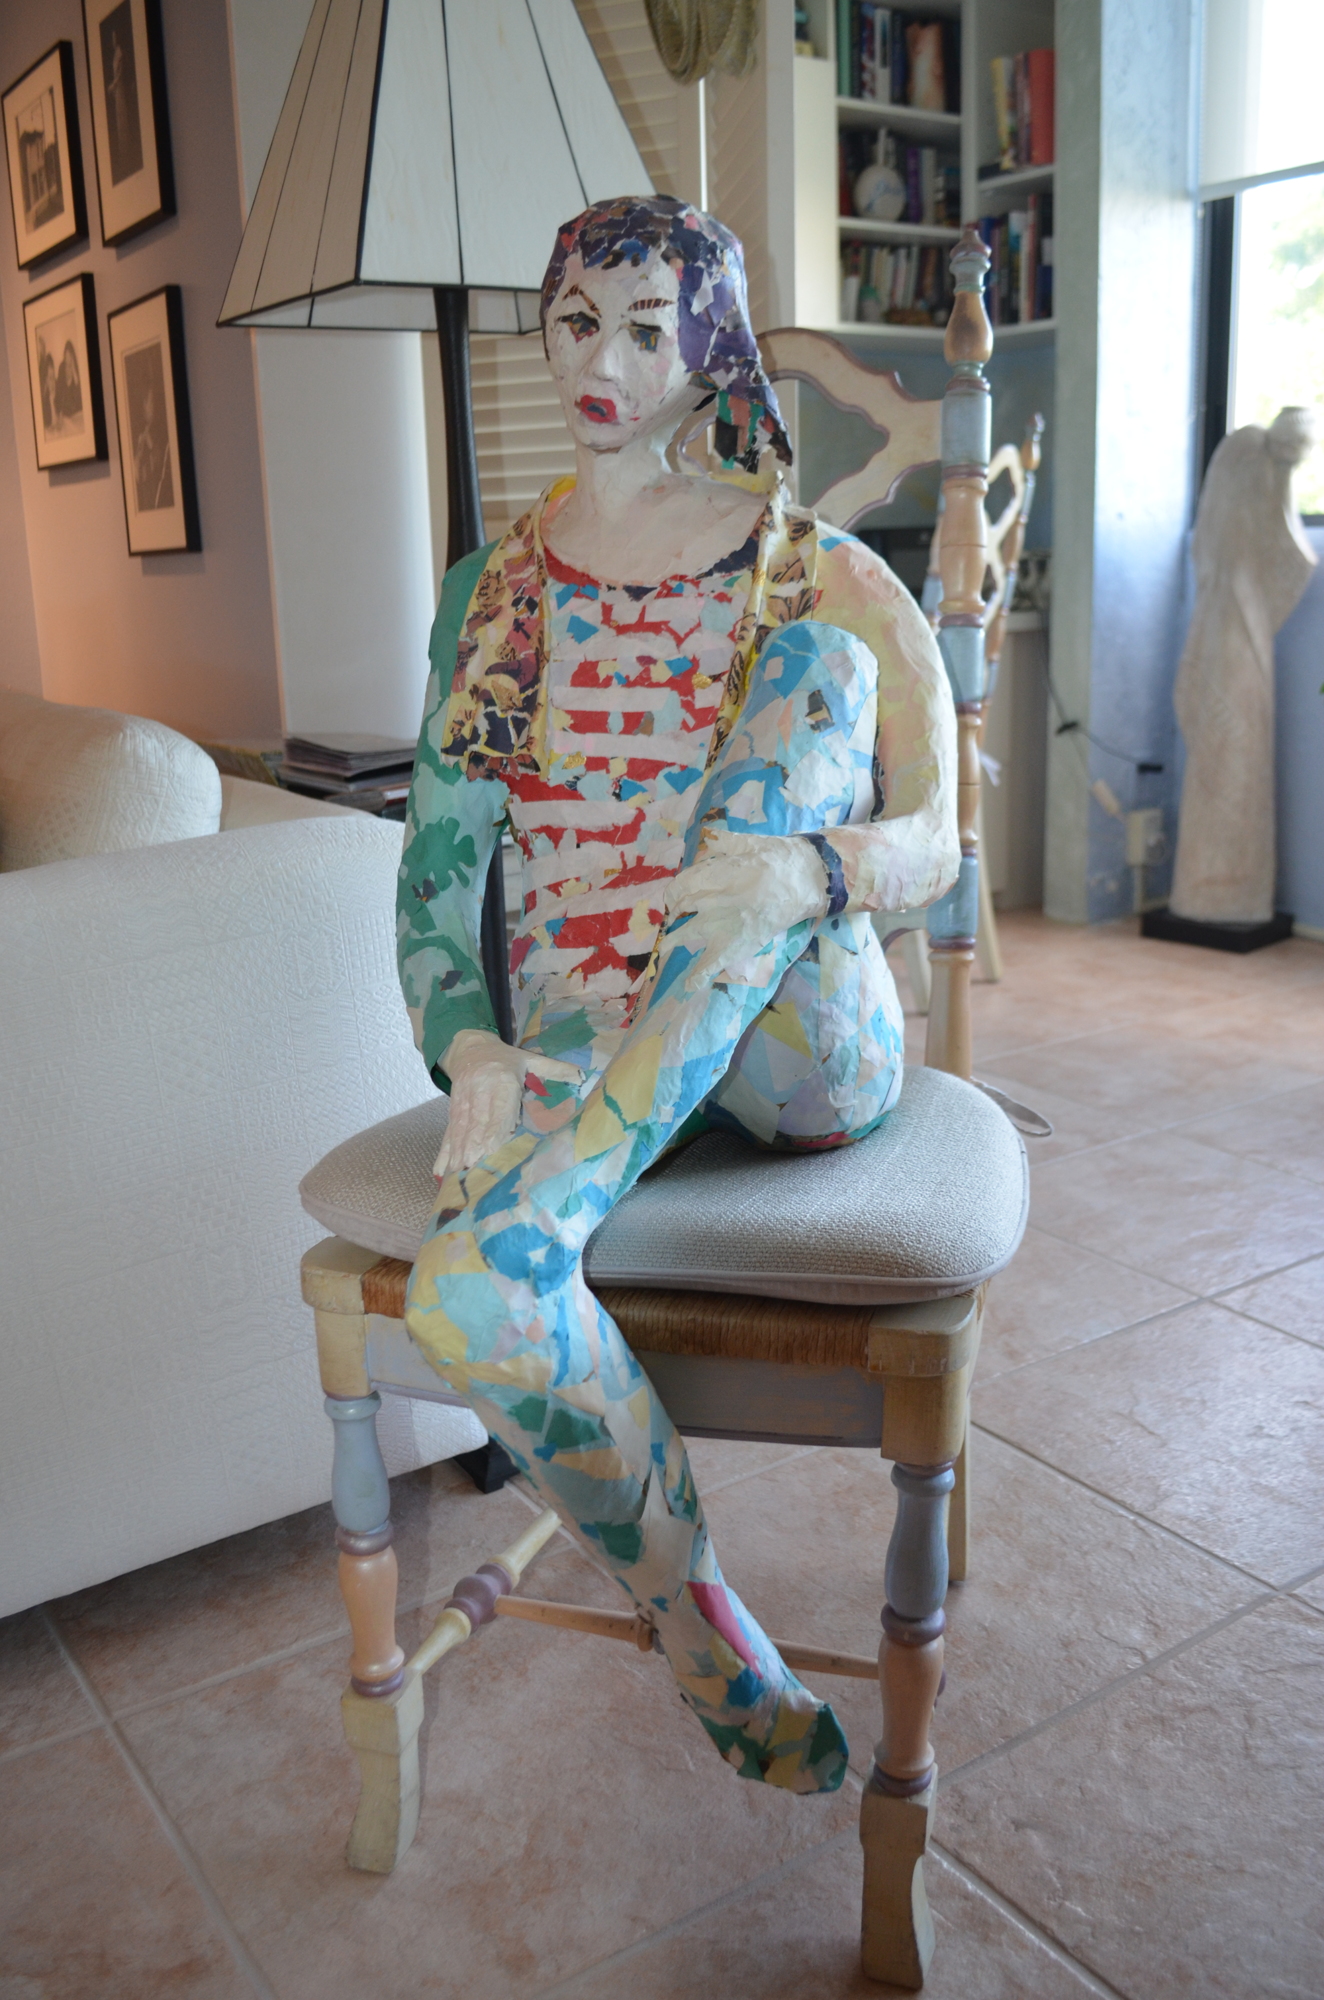 Levitt's home is filled with his artwork. This paper mache sculptures sits in a chair next to his living room.